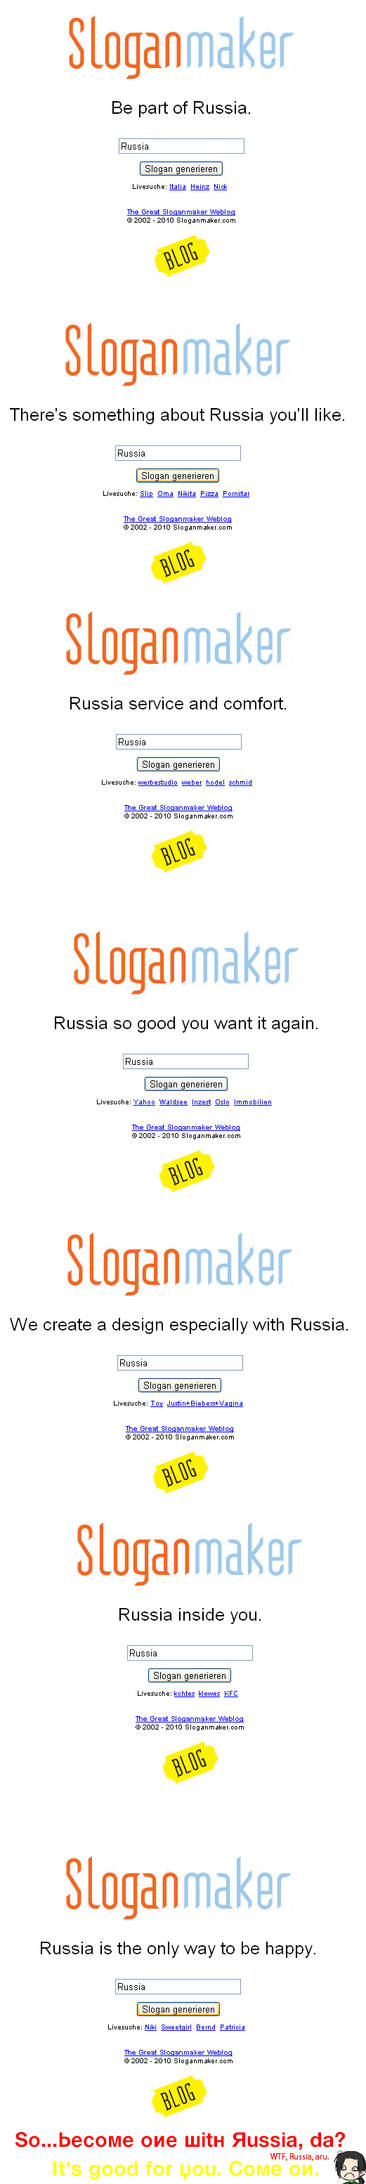 Fun with Sloganmaker: Russia